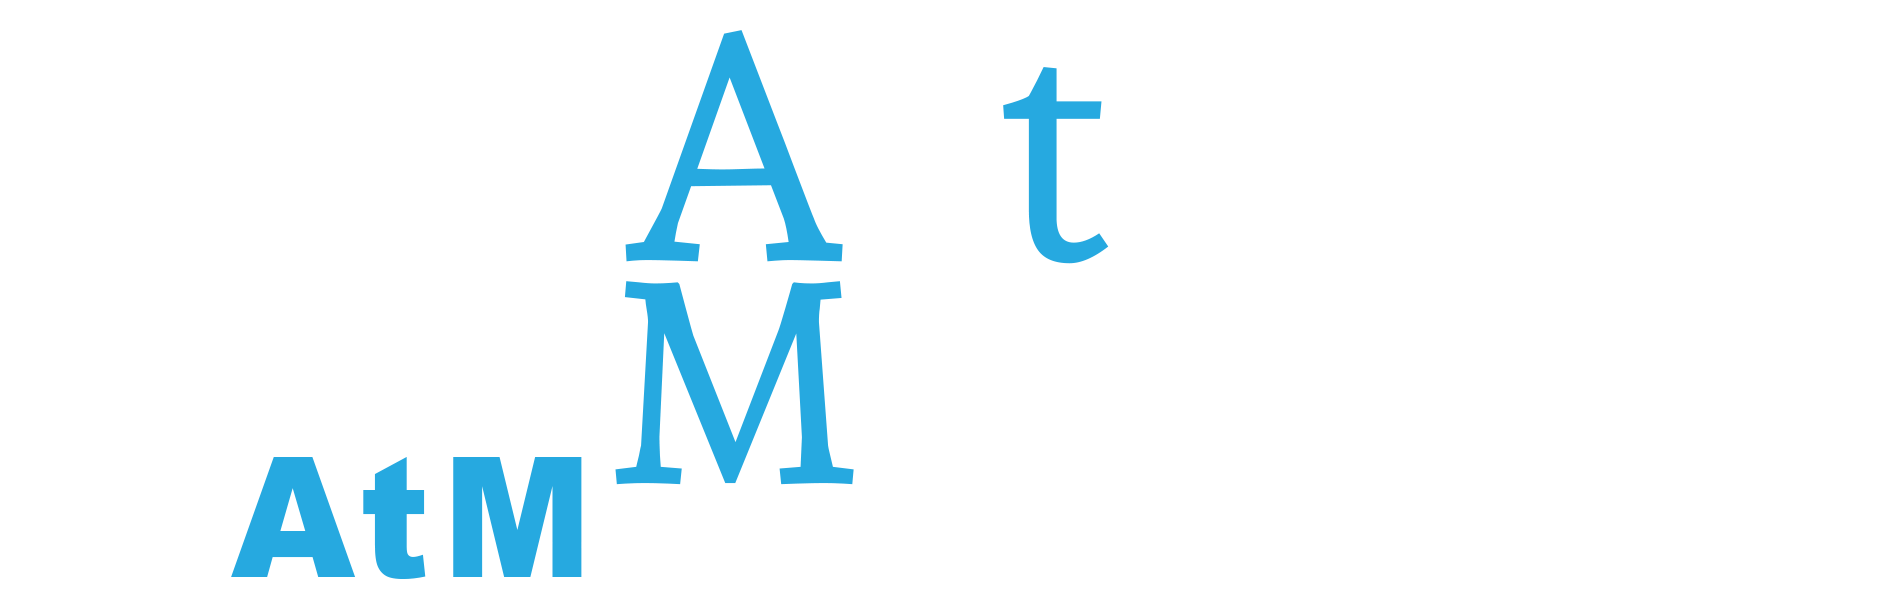 Leverage Your Reviews is Powered by AcTuated Marketing™